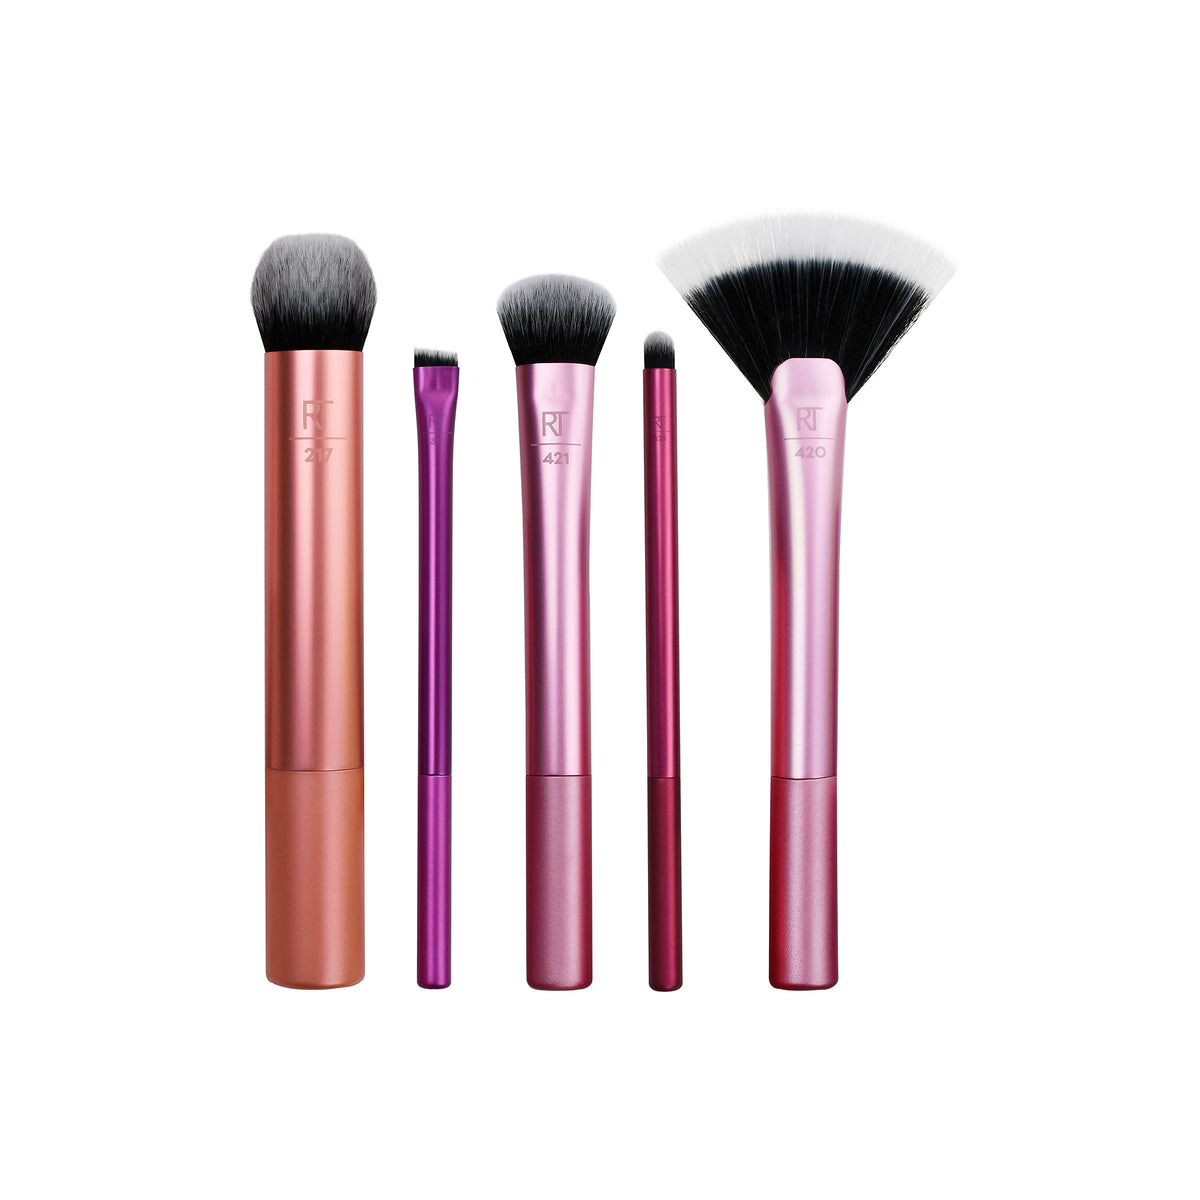 The 18 best makeup brushes and brush sets - TODAY